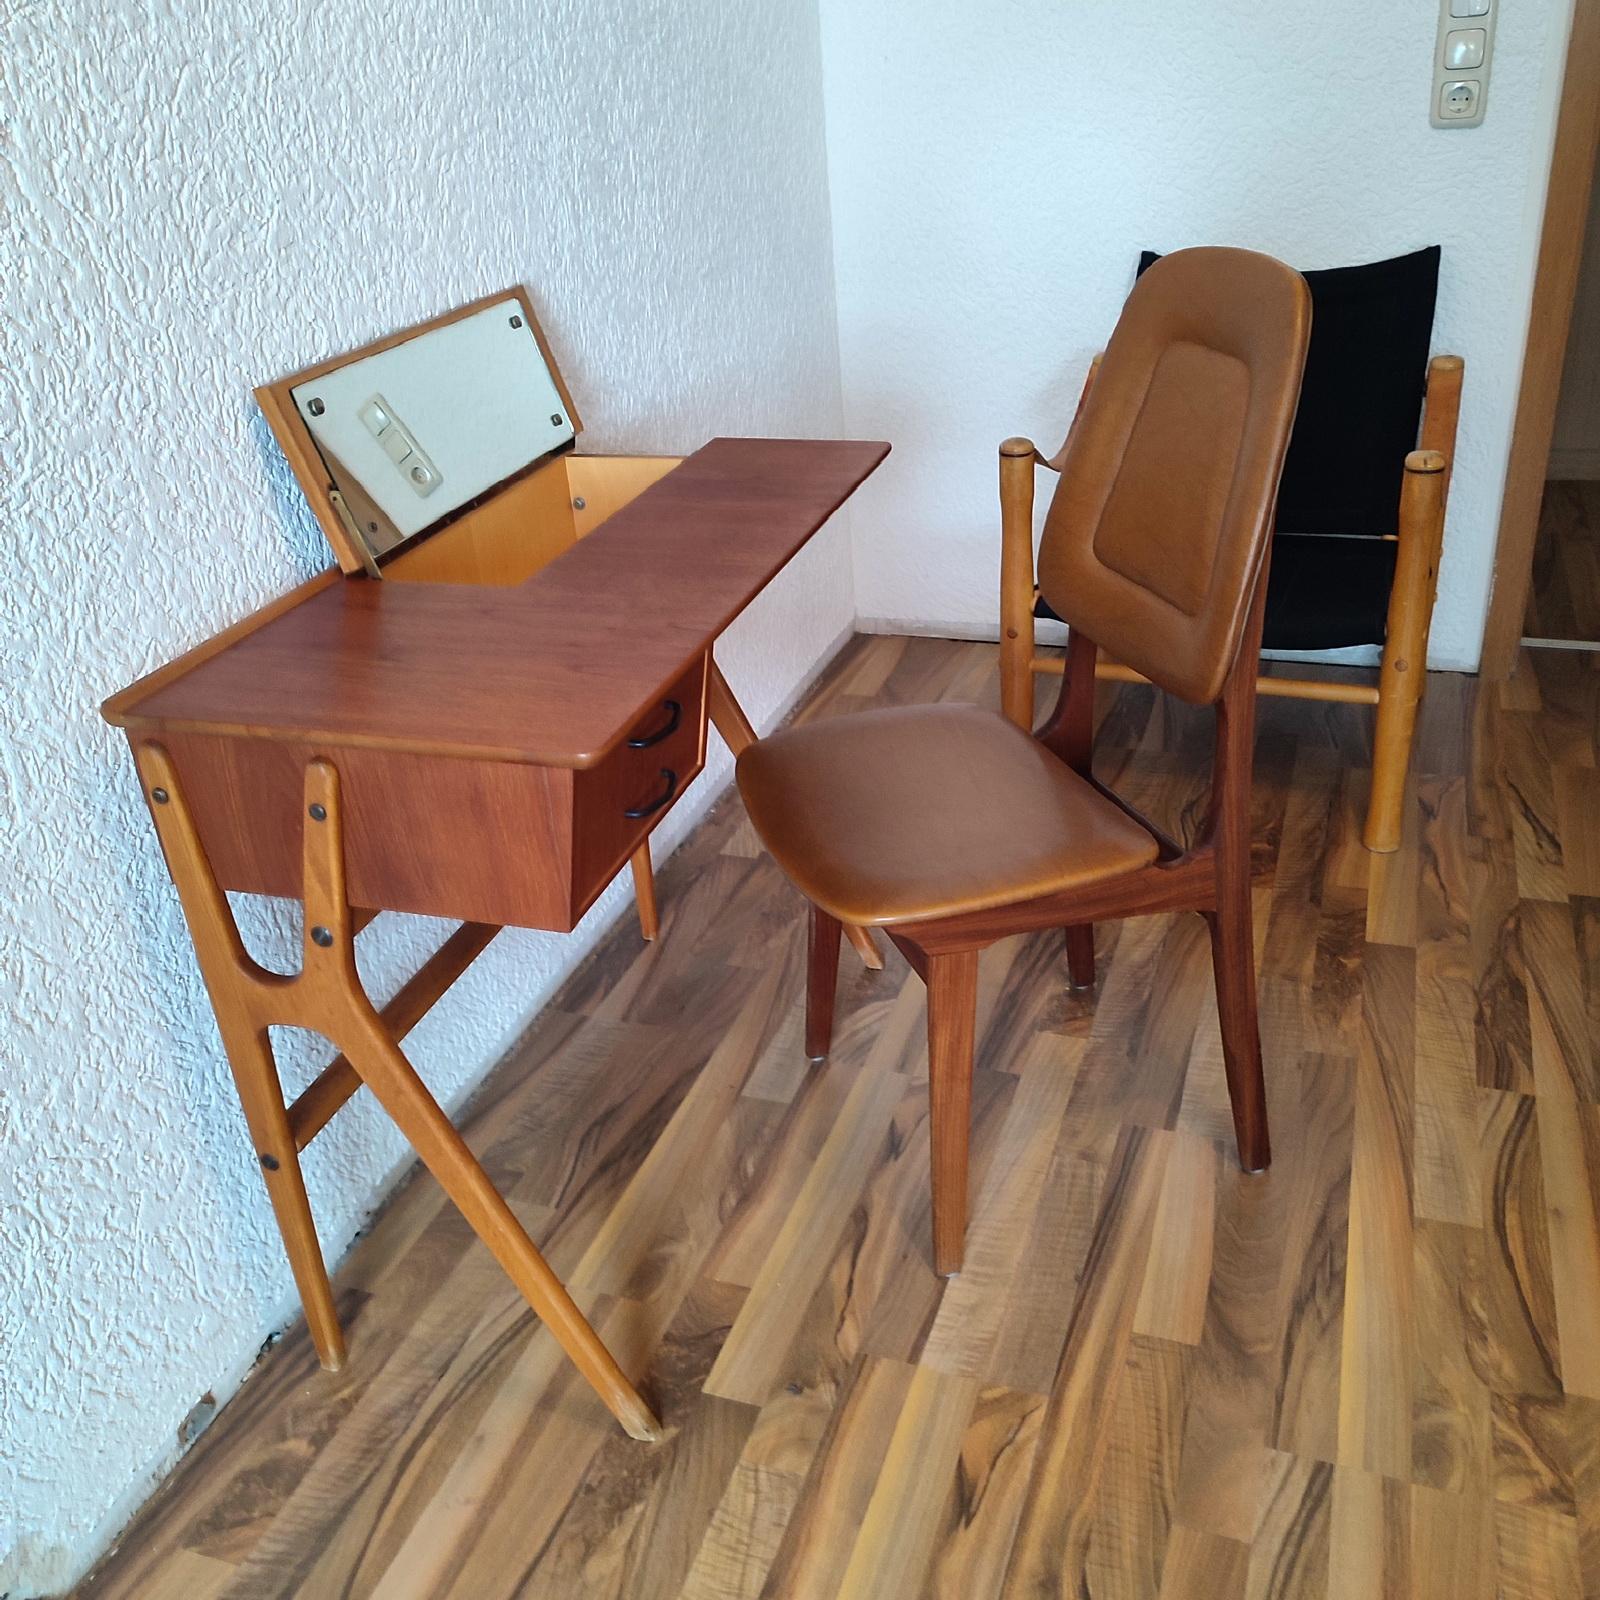 Faux Leather Scandinavian Lady Desk with Vanity Mirror and Chair by Sörheim Bruk, Norway